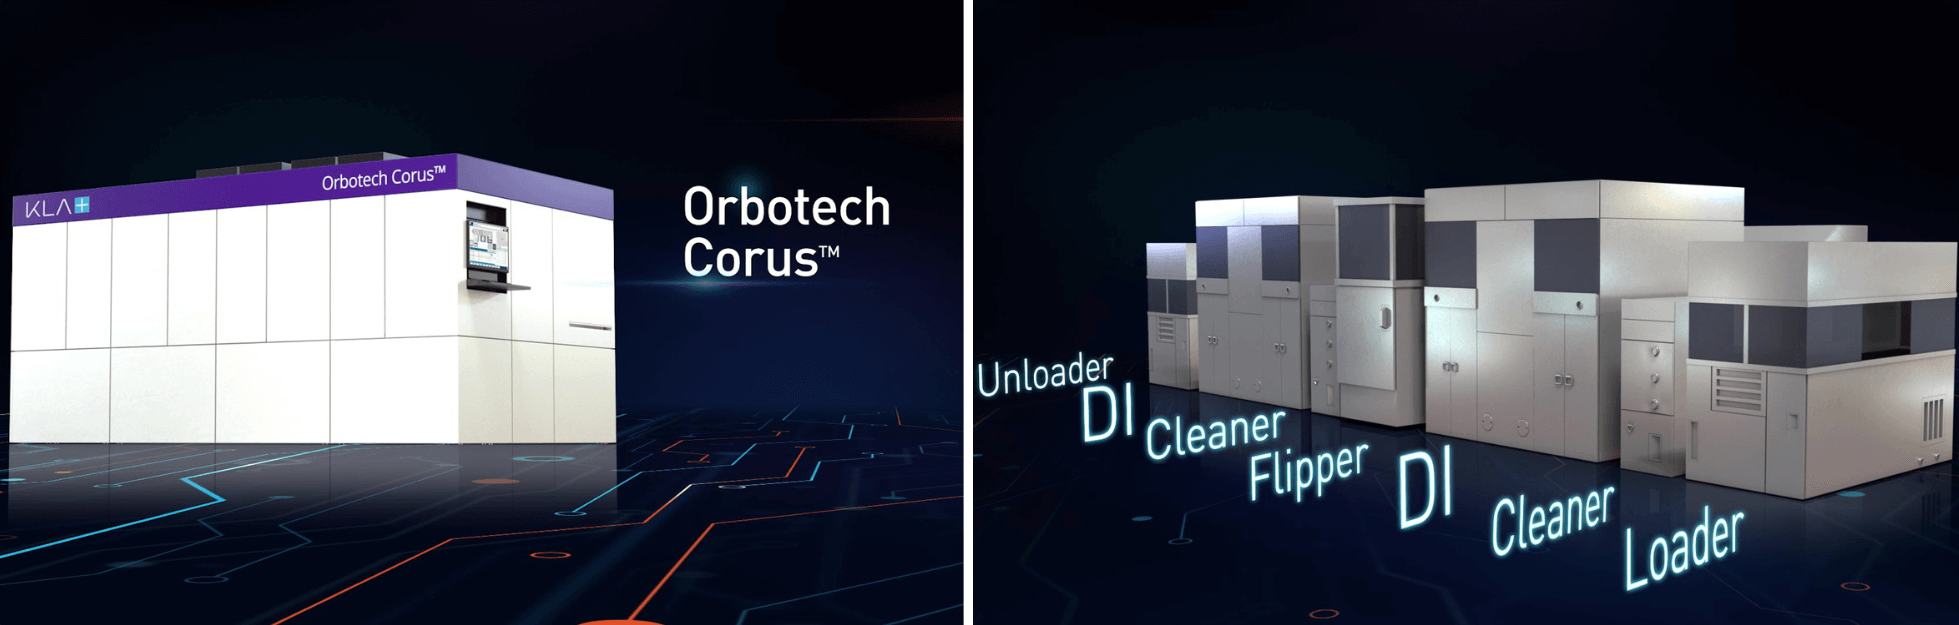 New Orbotech Corus™ Offers Double-Sided Imaging for High-Density